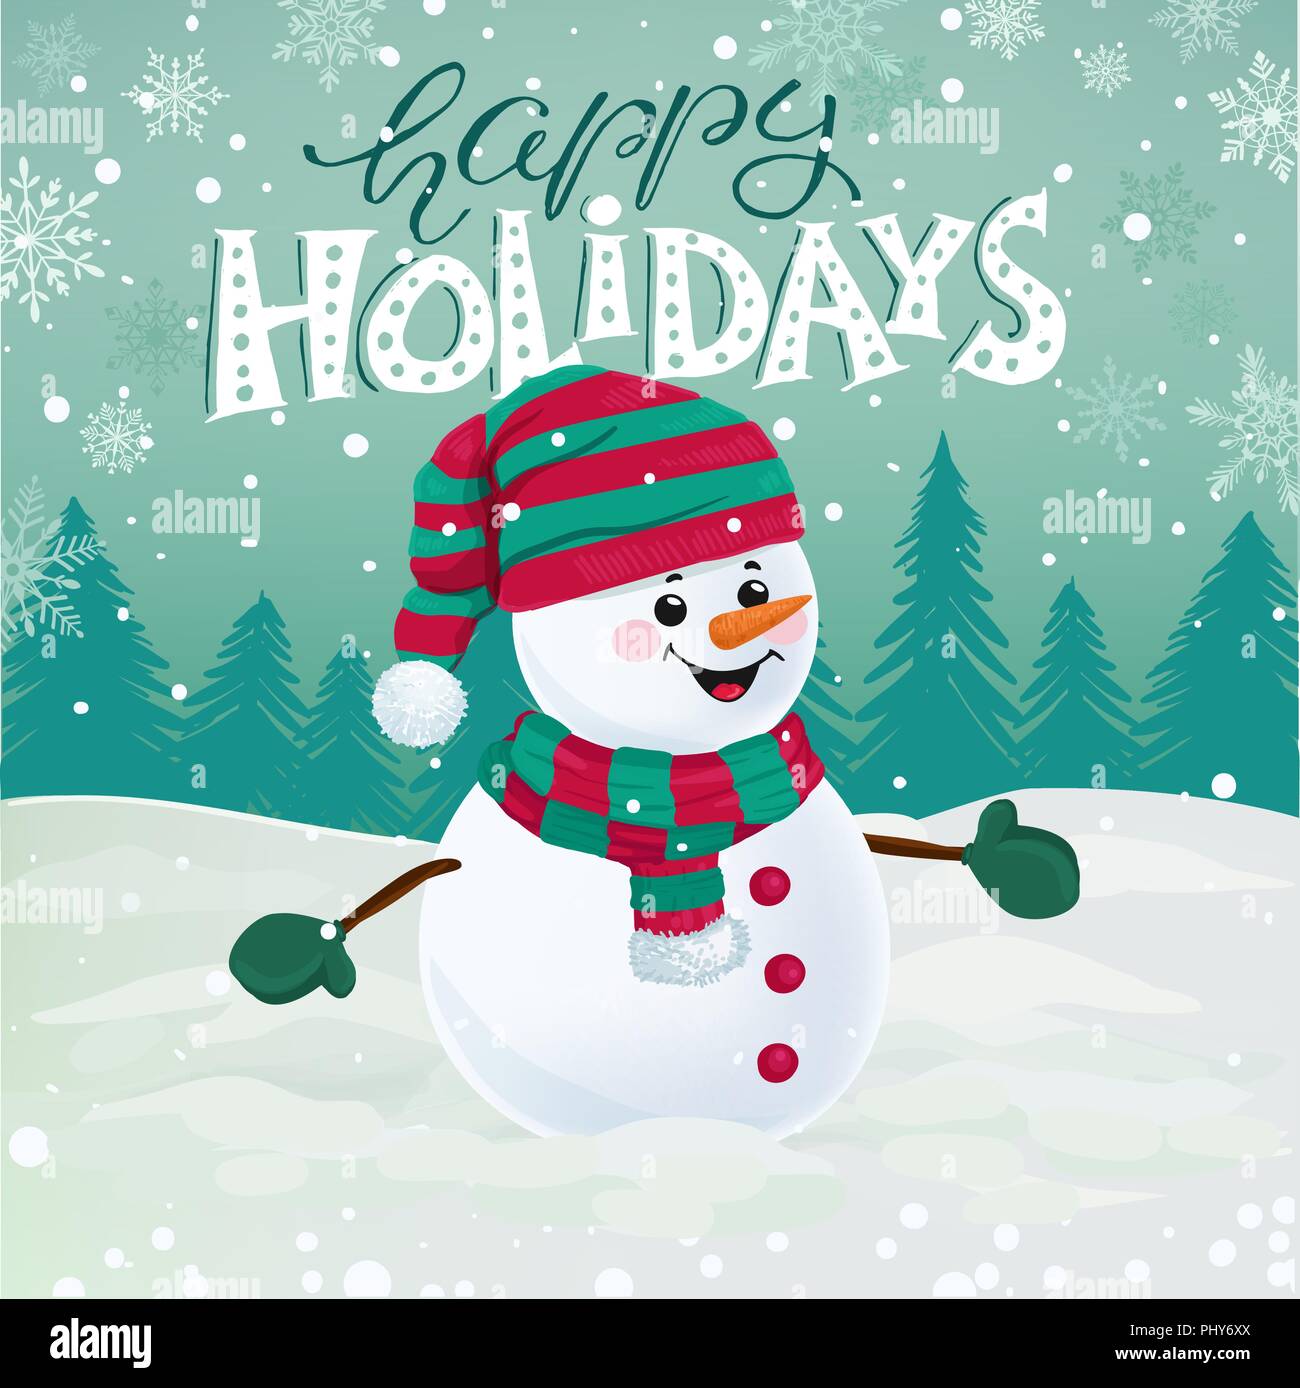 Funny snowman in hat, scarf and mittens on snowy background with holiday lettering.  Happy Holidays vector illustration. Stock Vector